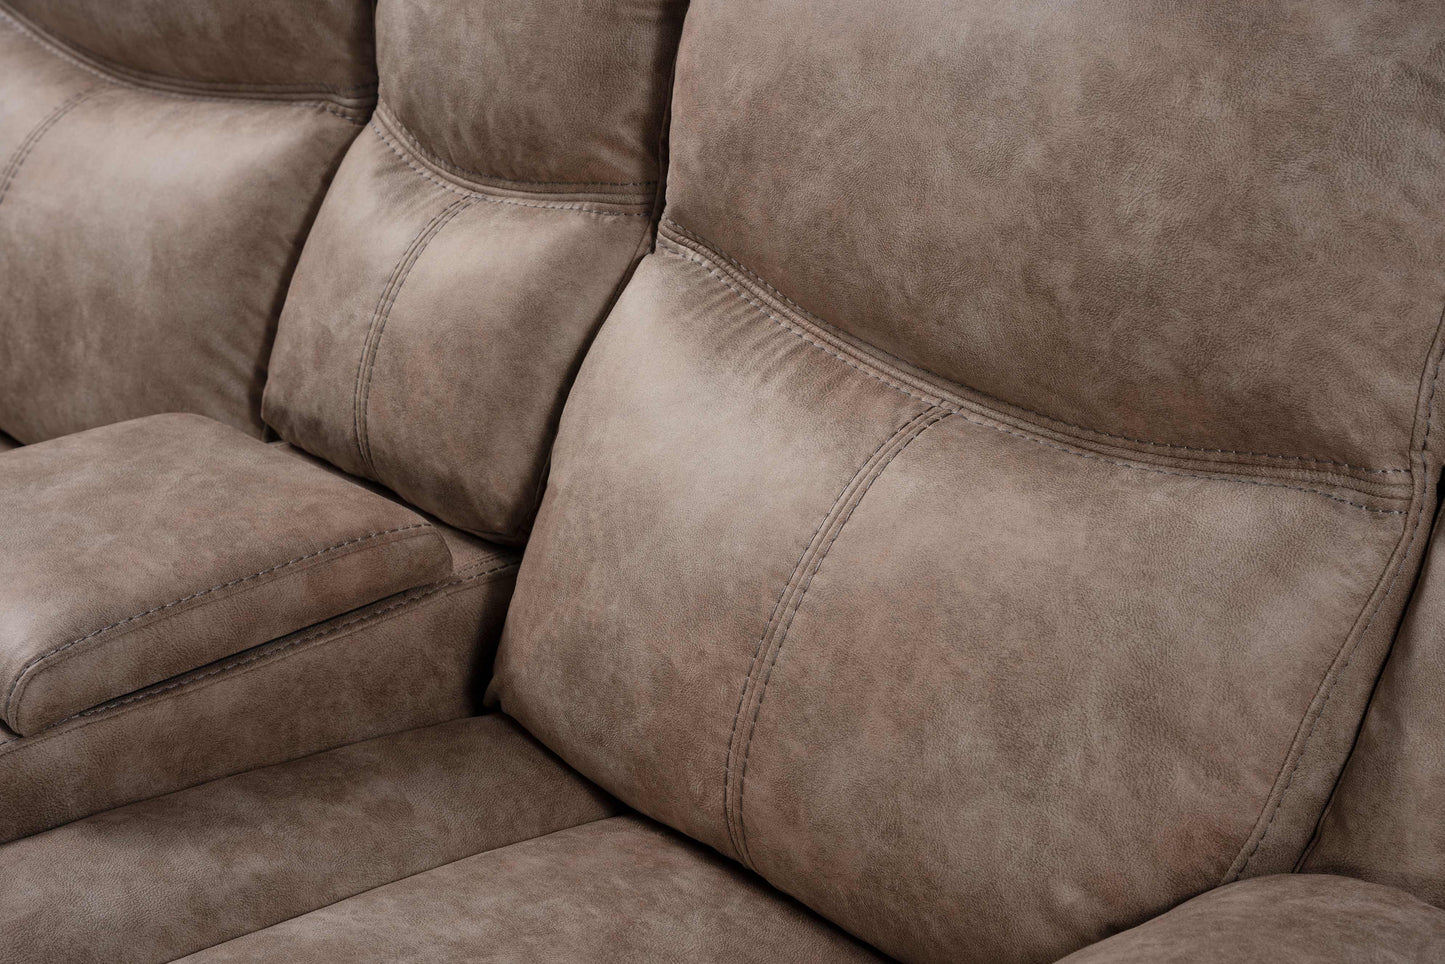 Ensley Faux Leather 3-Piece Reclining Living Room Collection, Sand